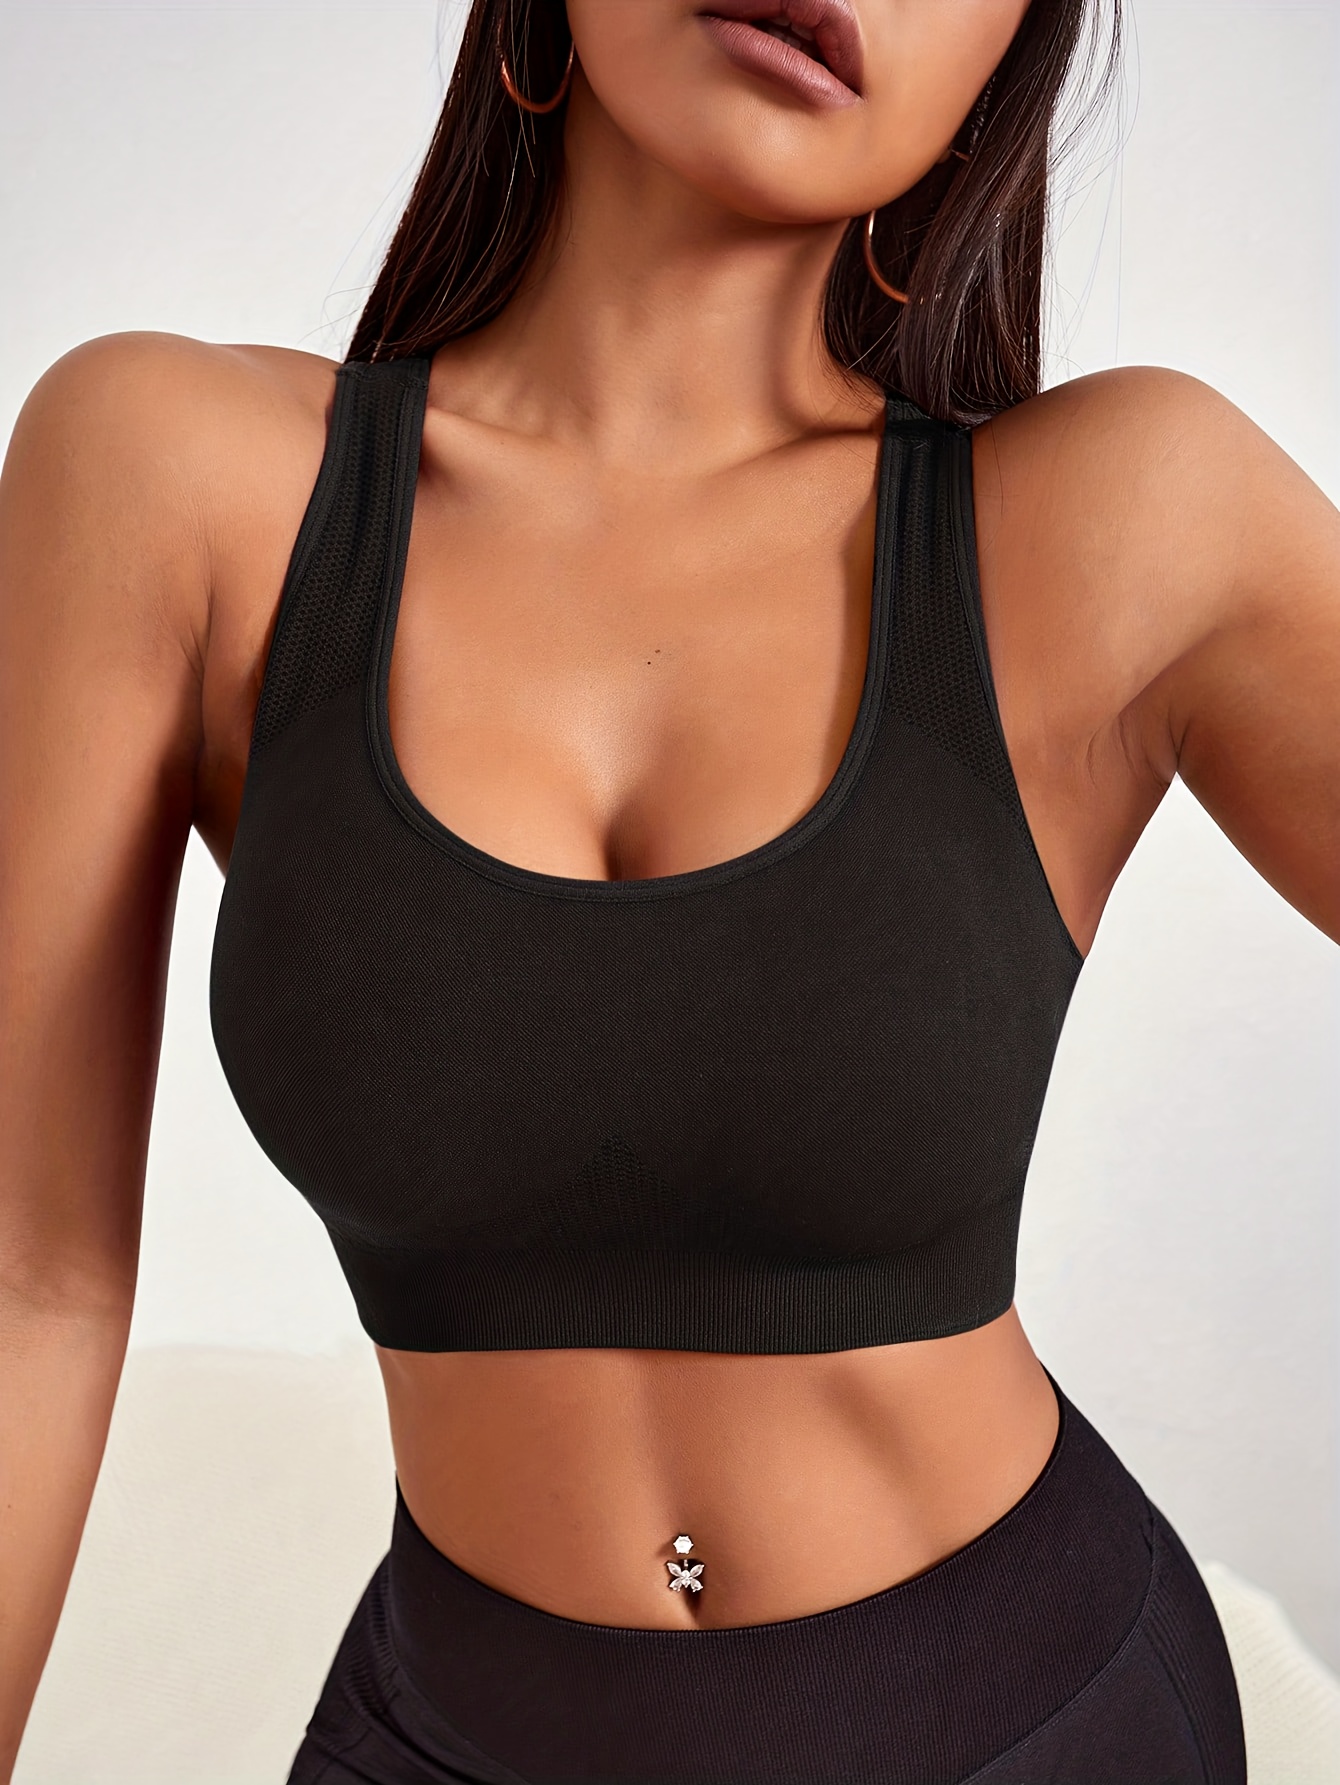 Large Size Single-layer Wrapped Chest Sports VestSports Bras for Women  Support Athletic Yoga Runining Tops 